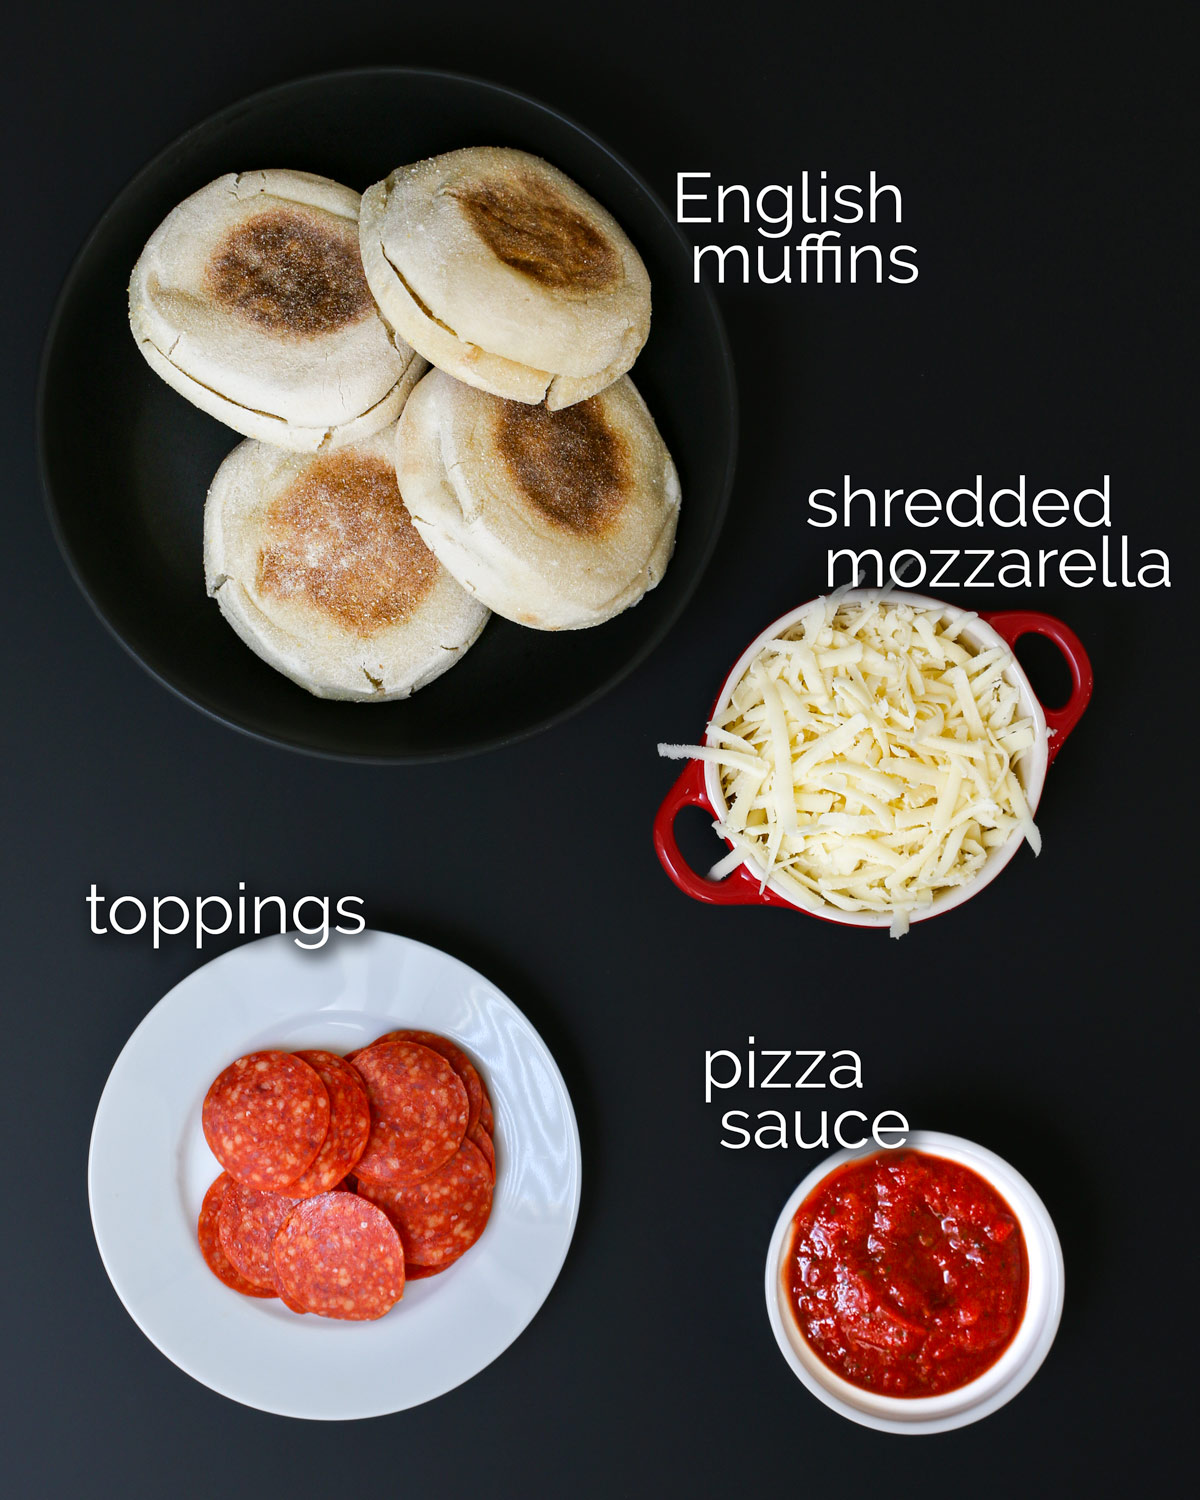 ingredients for English muffin pizzas laid out on a black table.